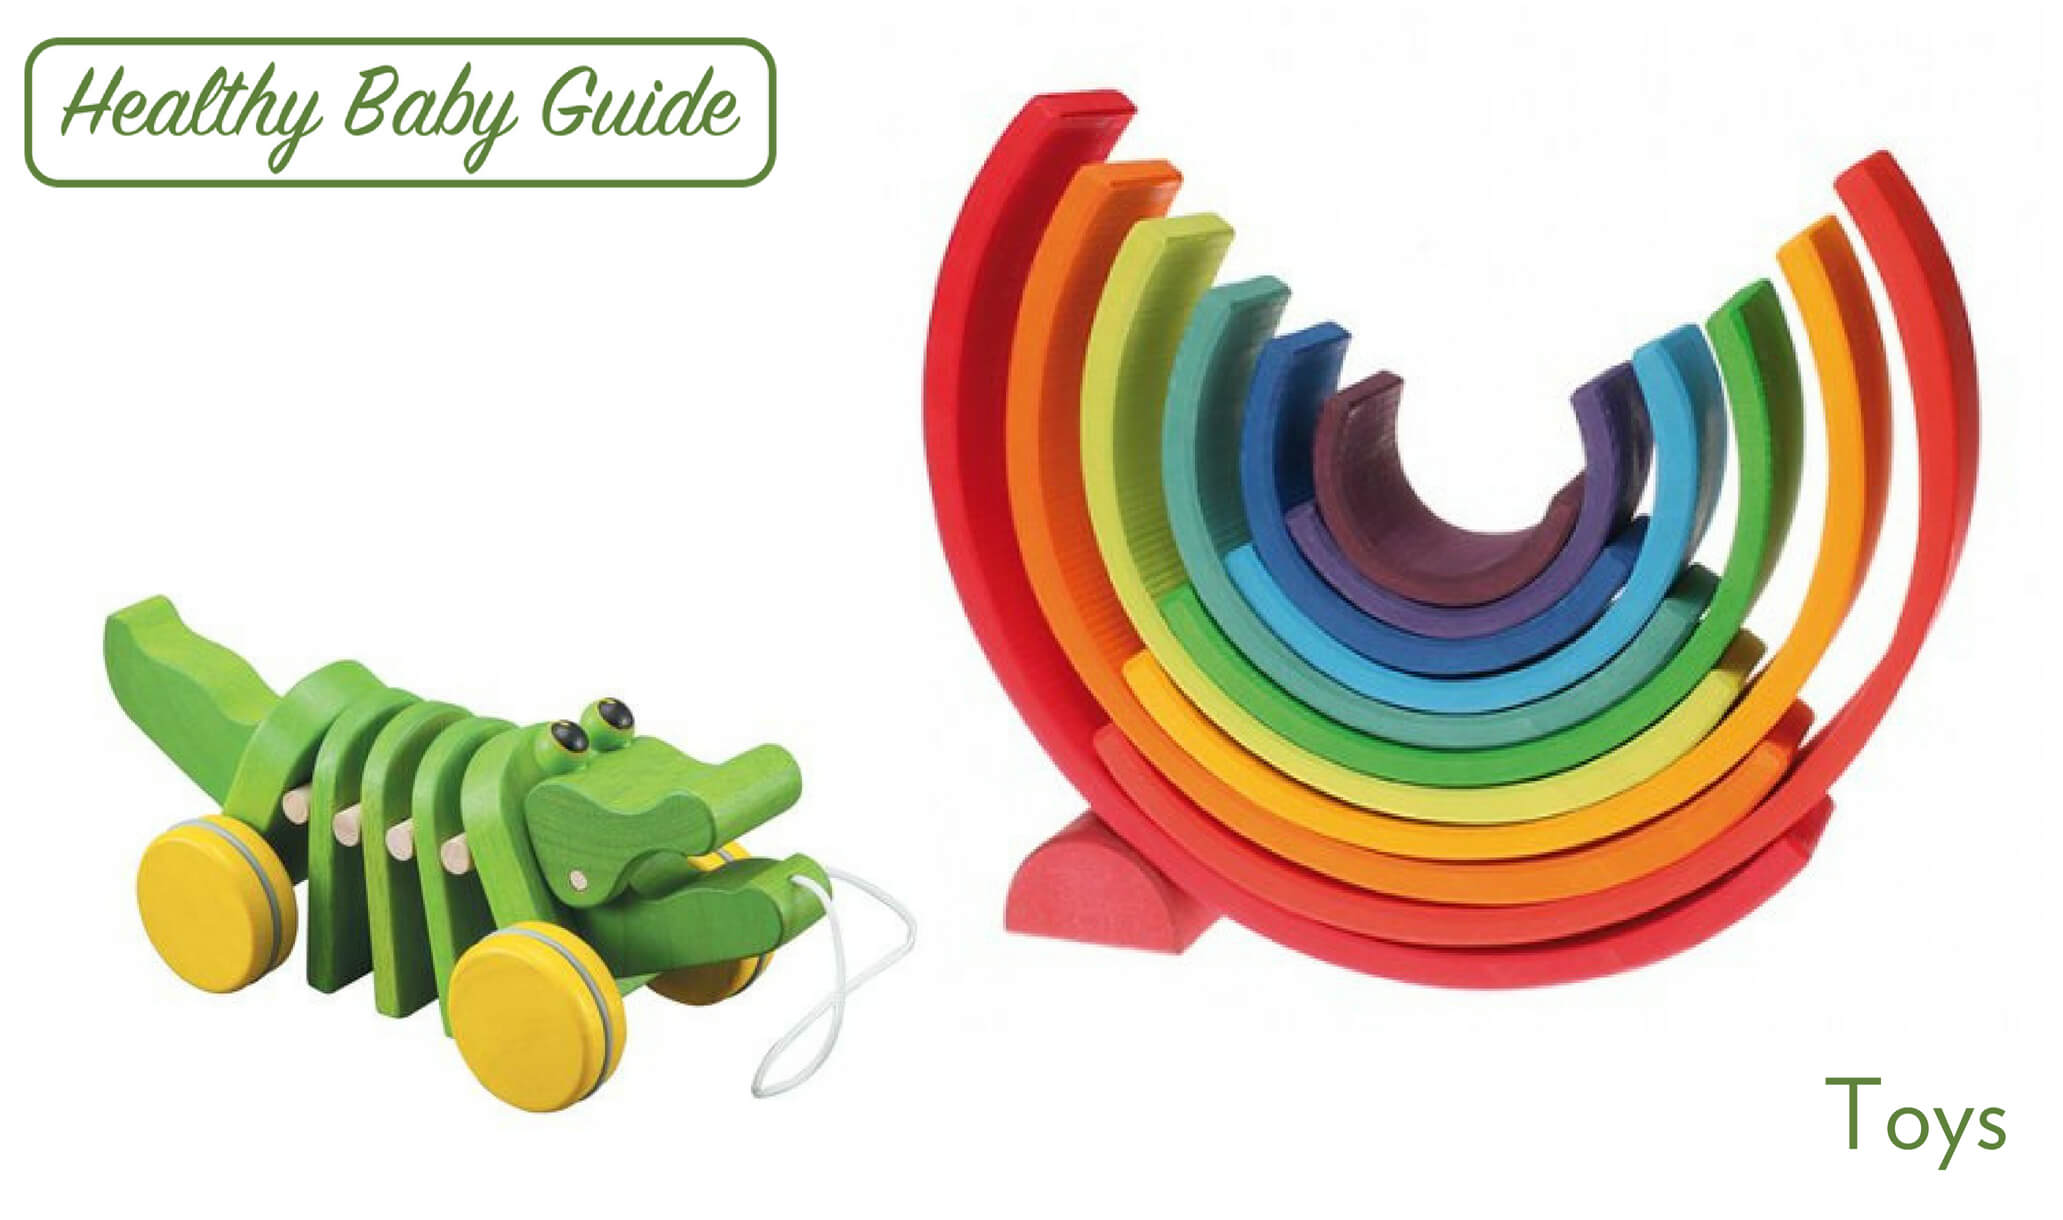 A Toys Healthy Baby Guide From Sprout